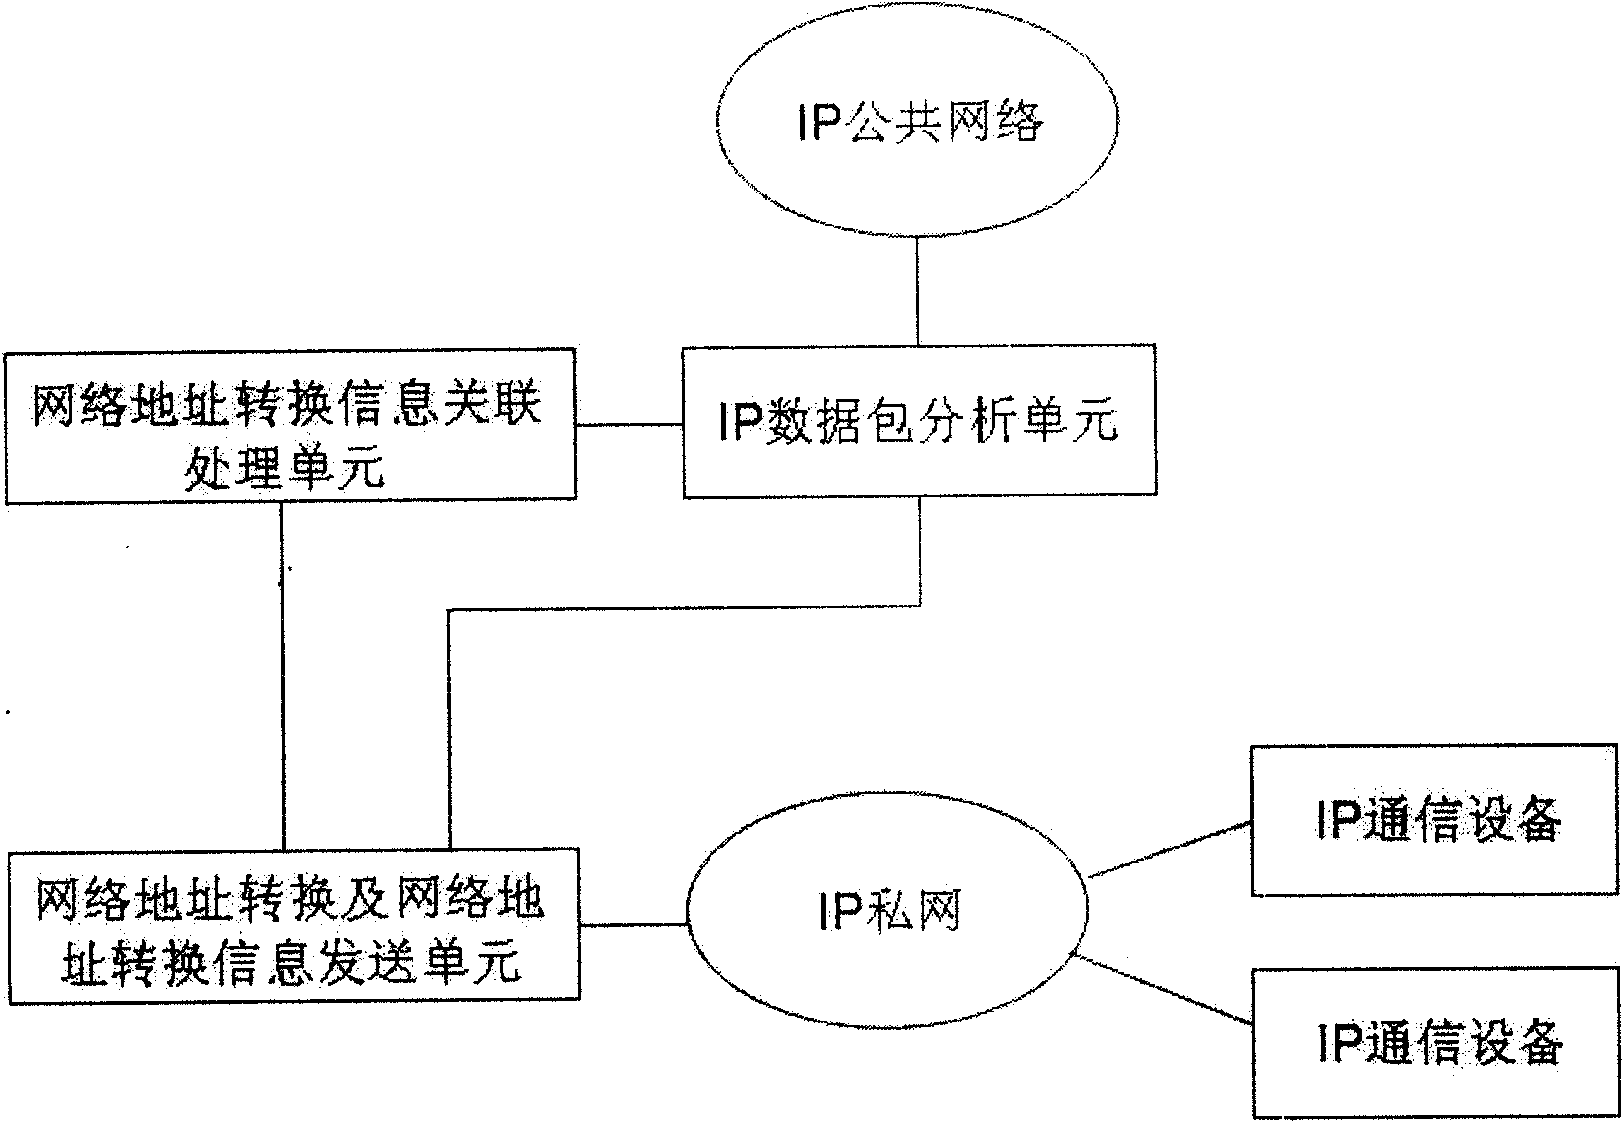 System for monitoring network communication data packets